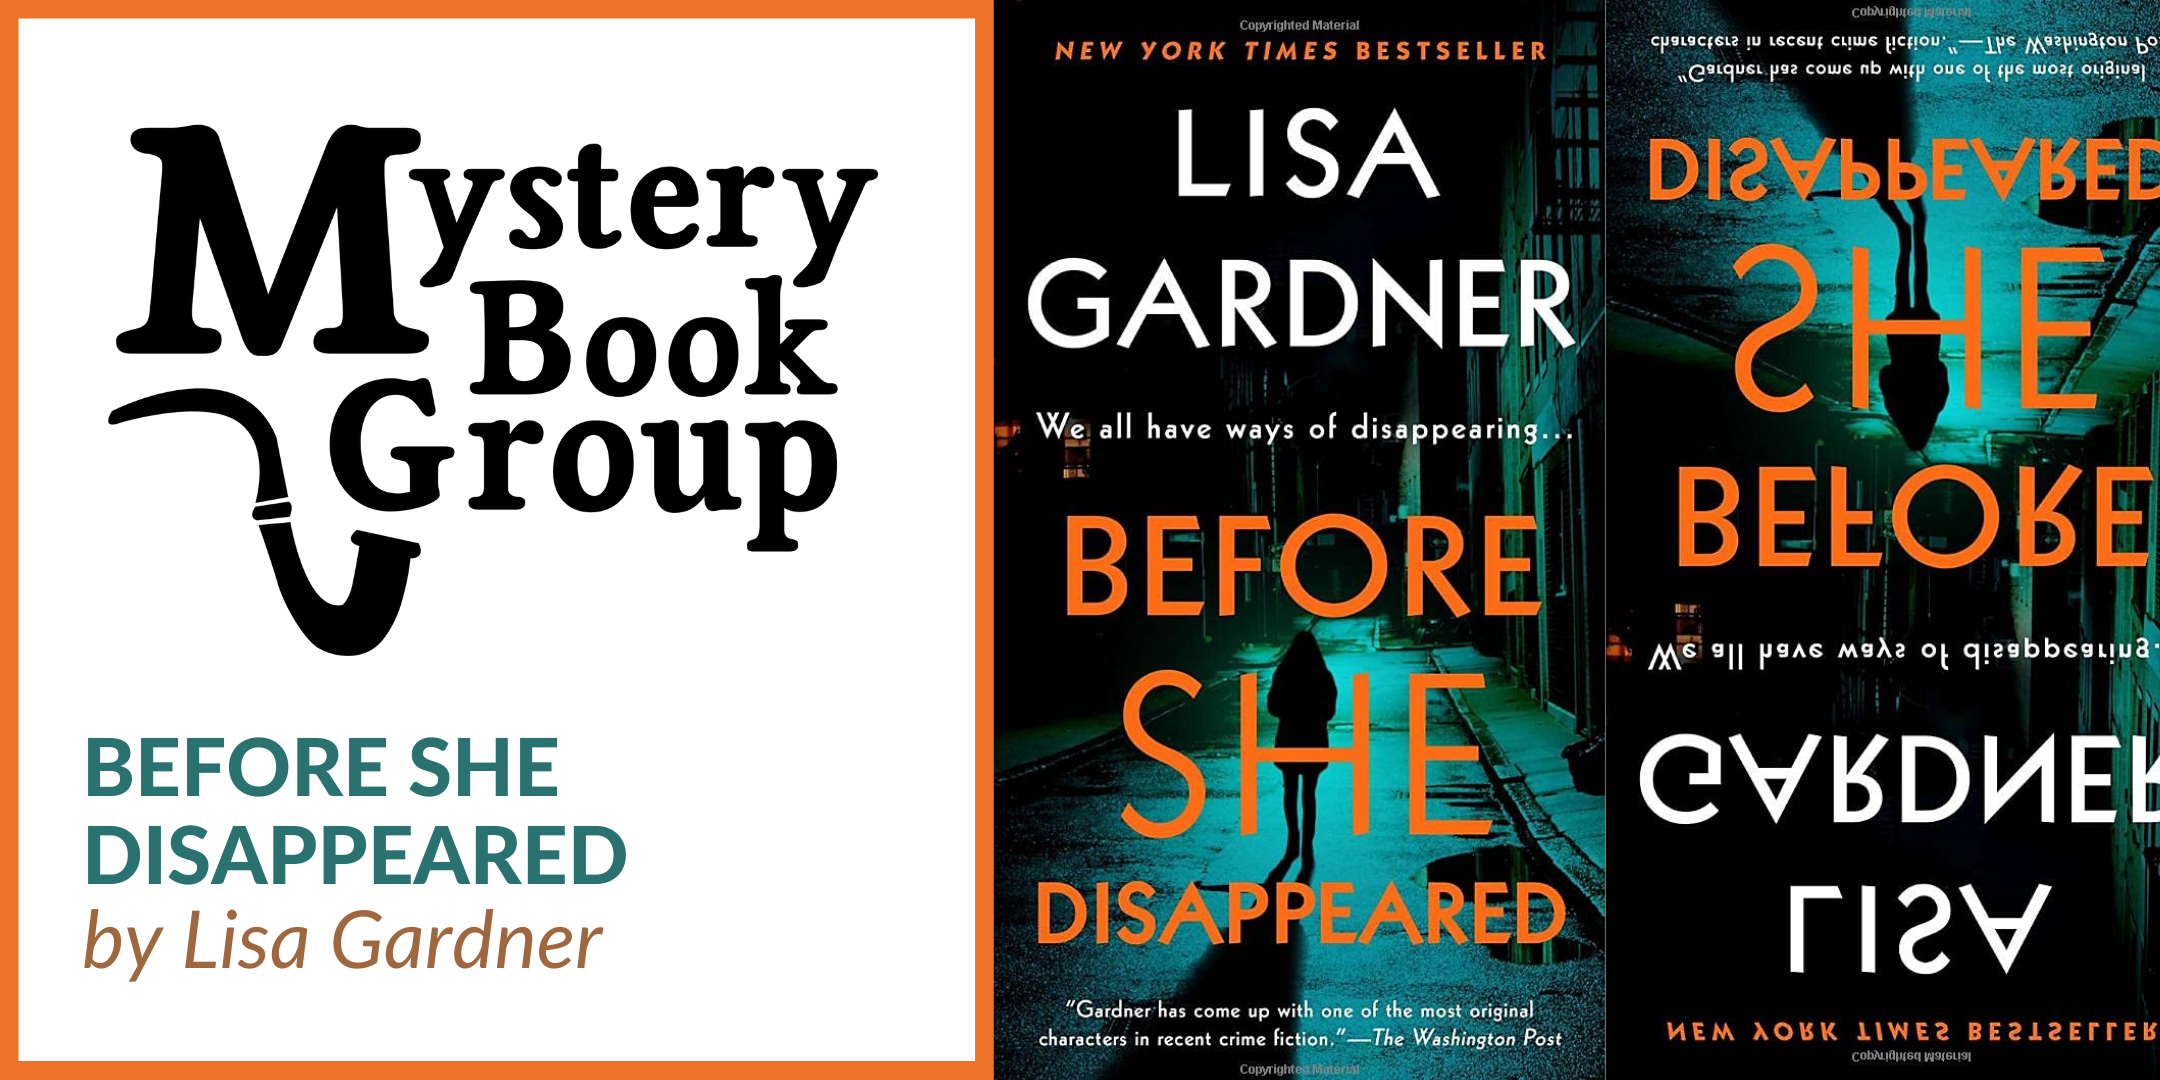 Image of "Mystery Book Group: "Before She Disappeared""